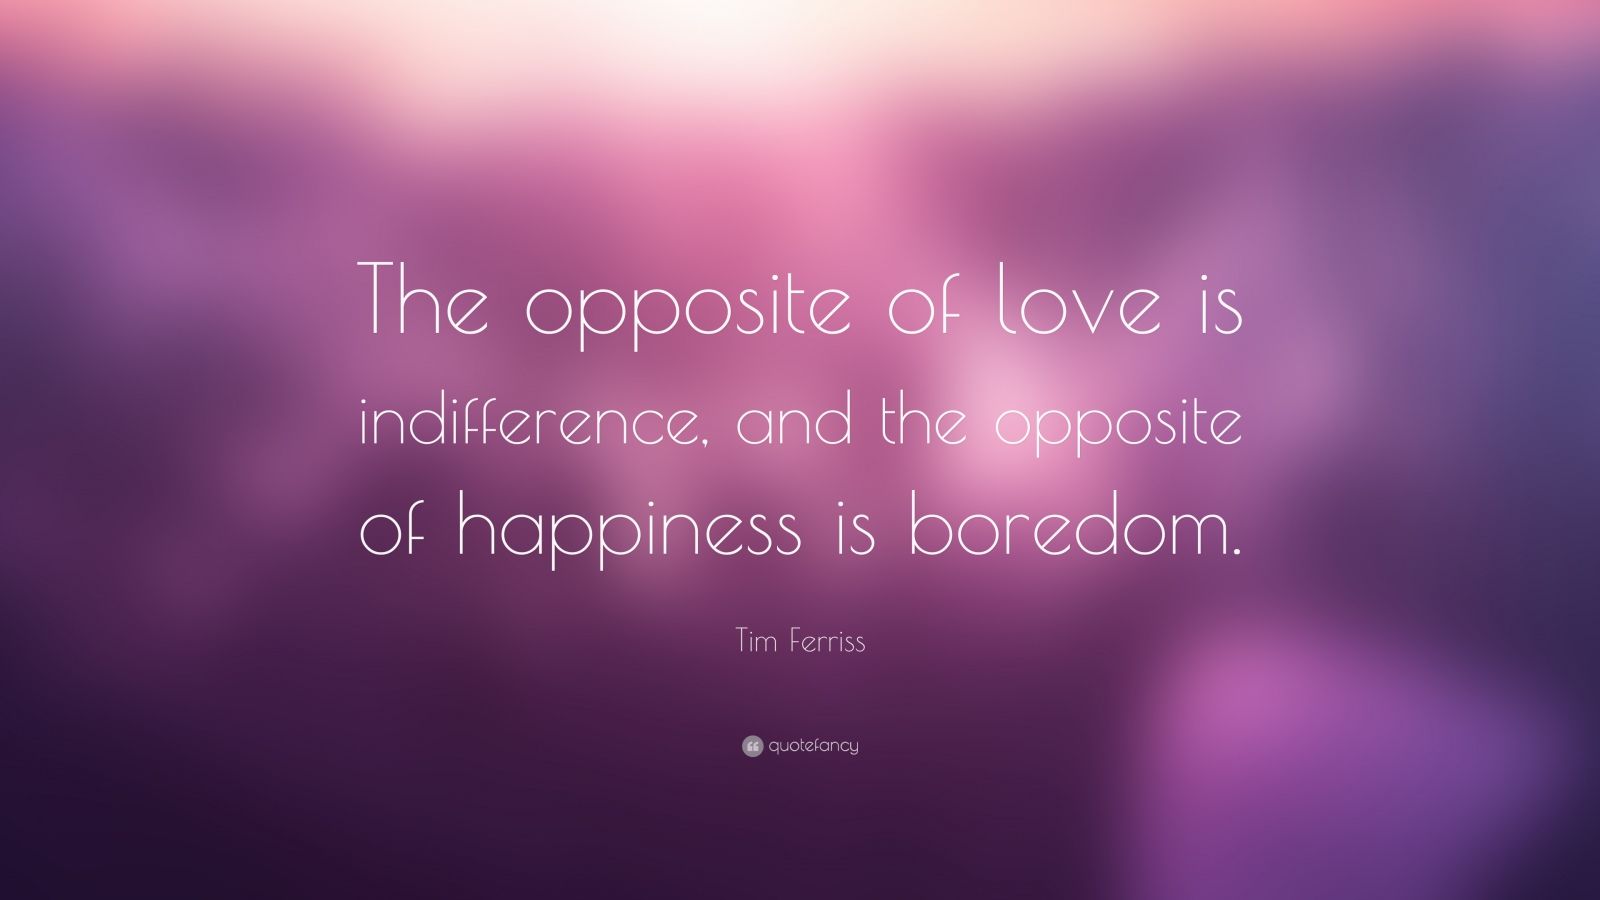 Tim Ferriss Quote: “The opposite of love is indifference, and the ...